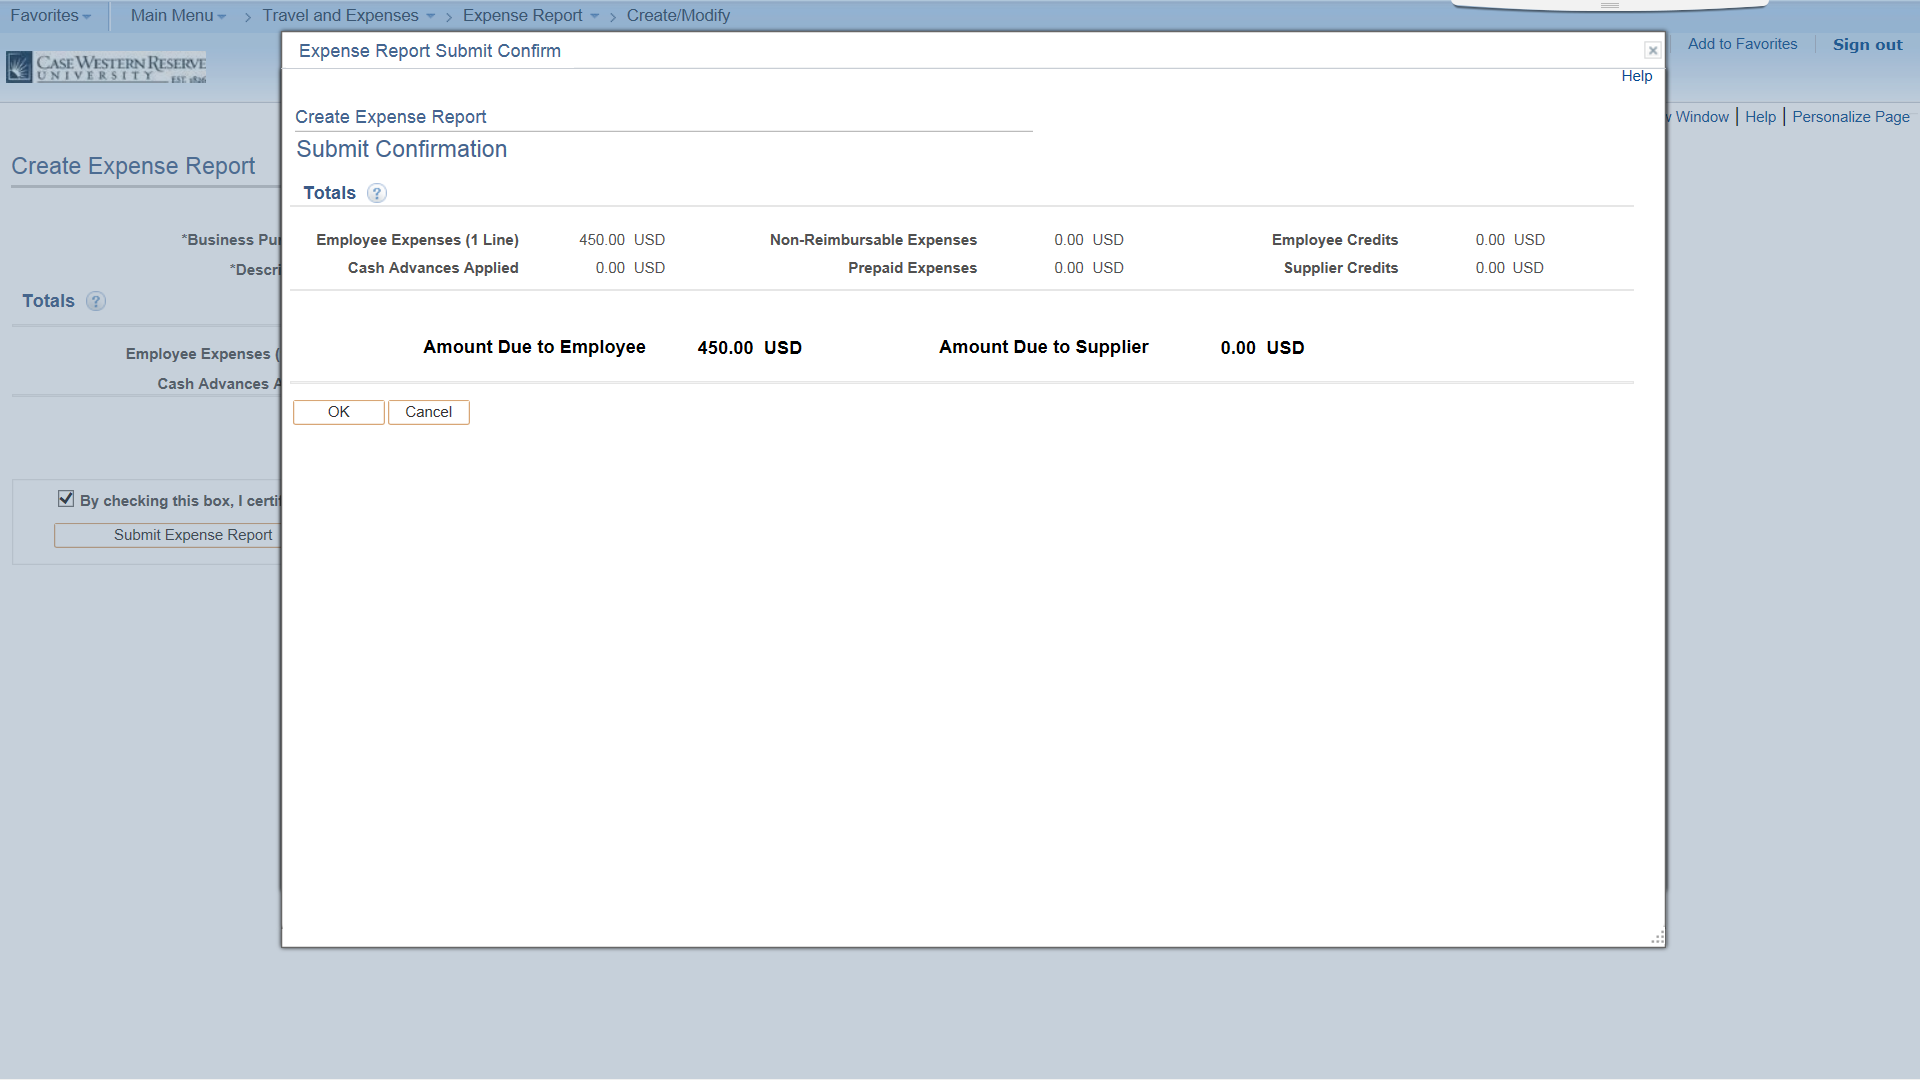 PeopleSoft Financials screen shot displaying expense report confirmation